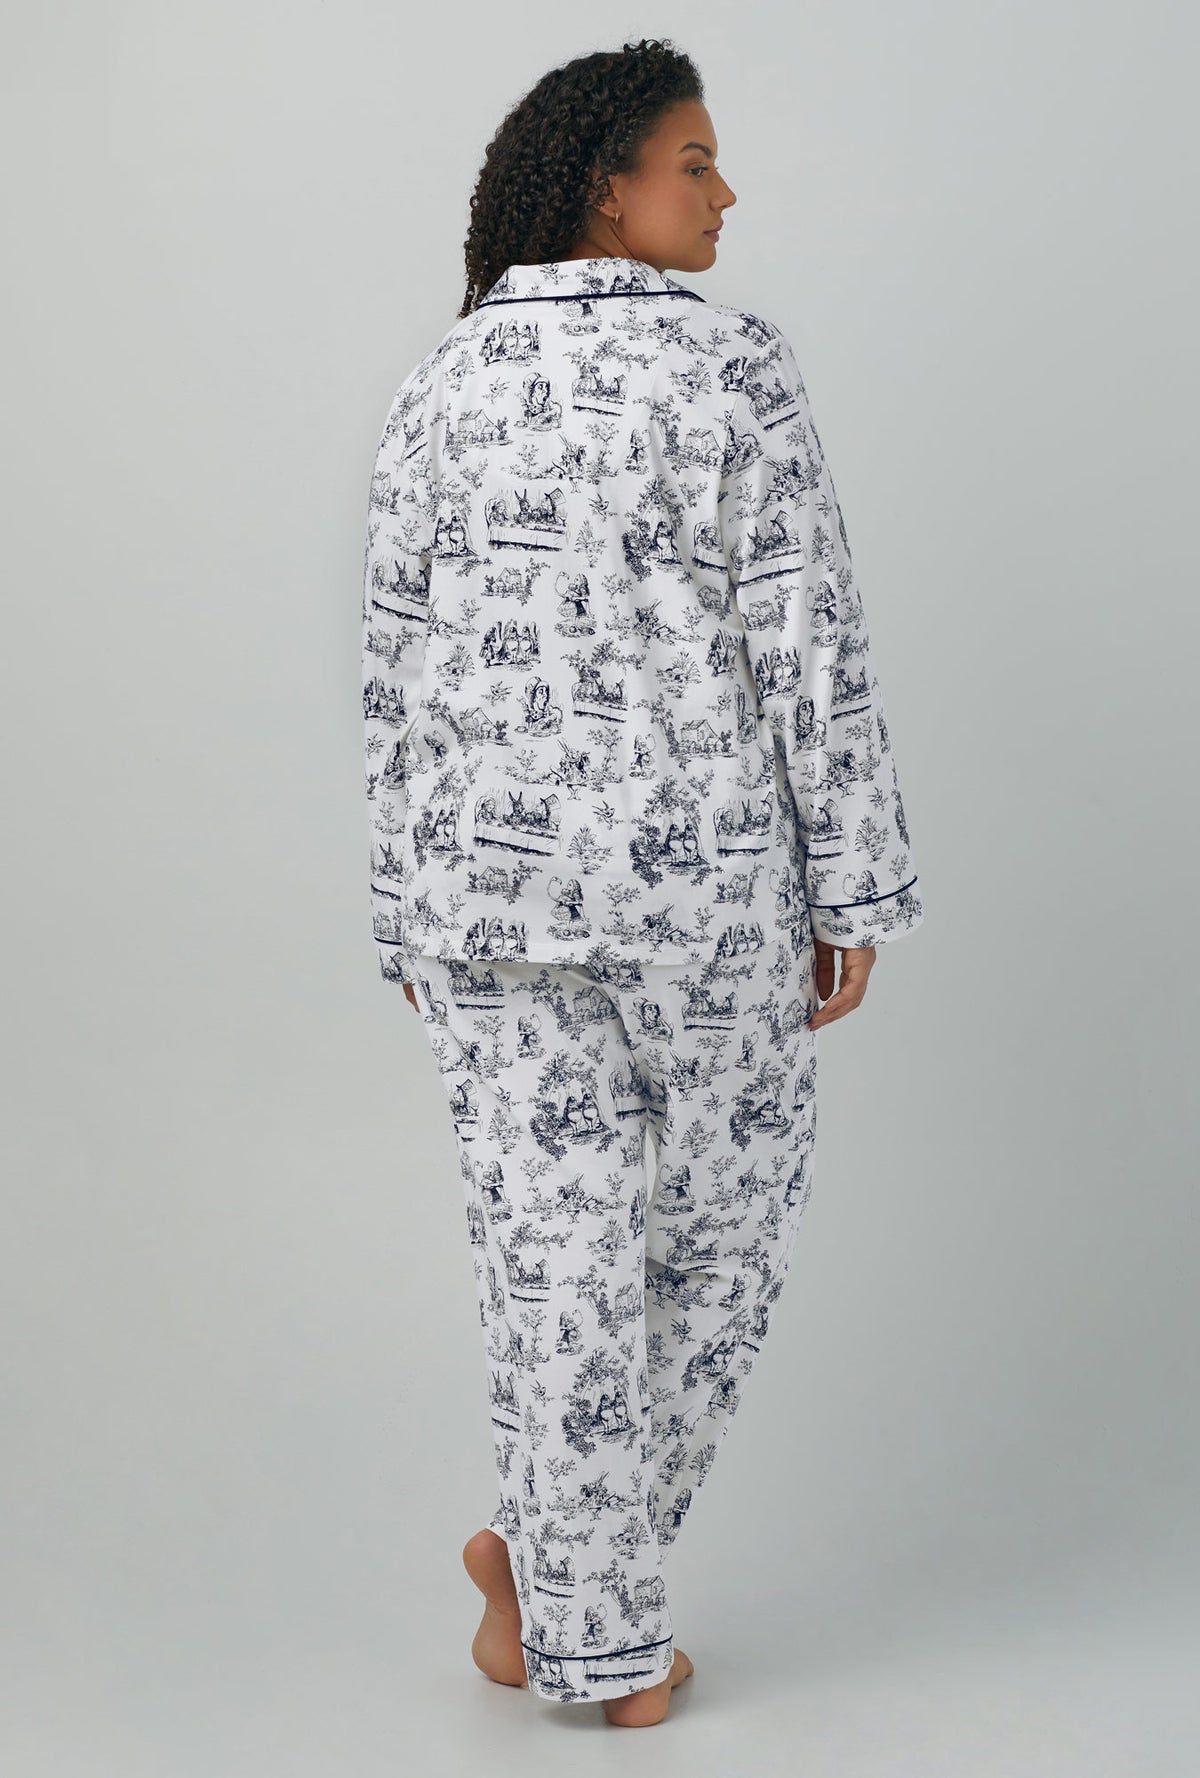 A lady wearing plus size white Long Sleeve Classic Stretch Jersey PJ Set with Adventures in Wonderland print